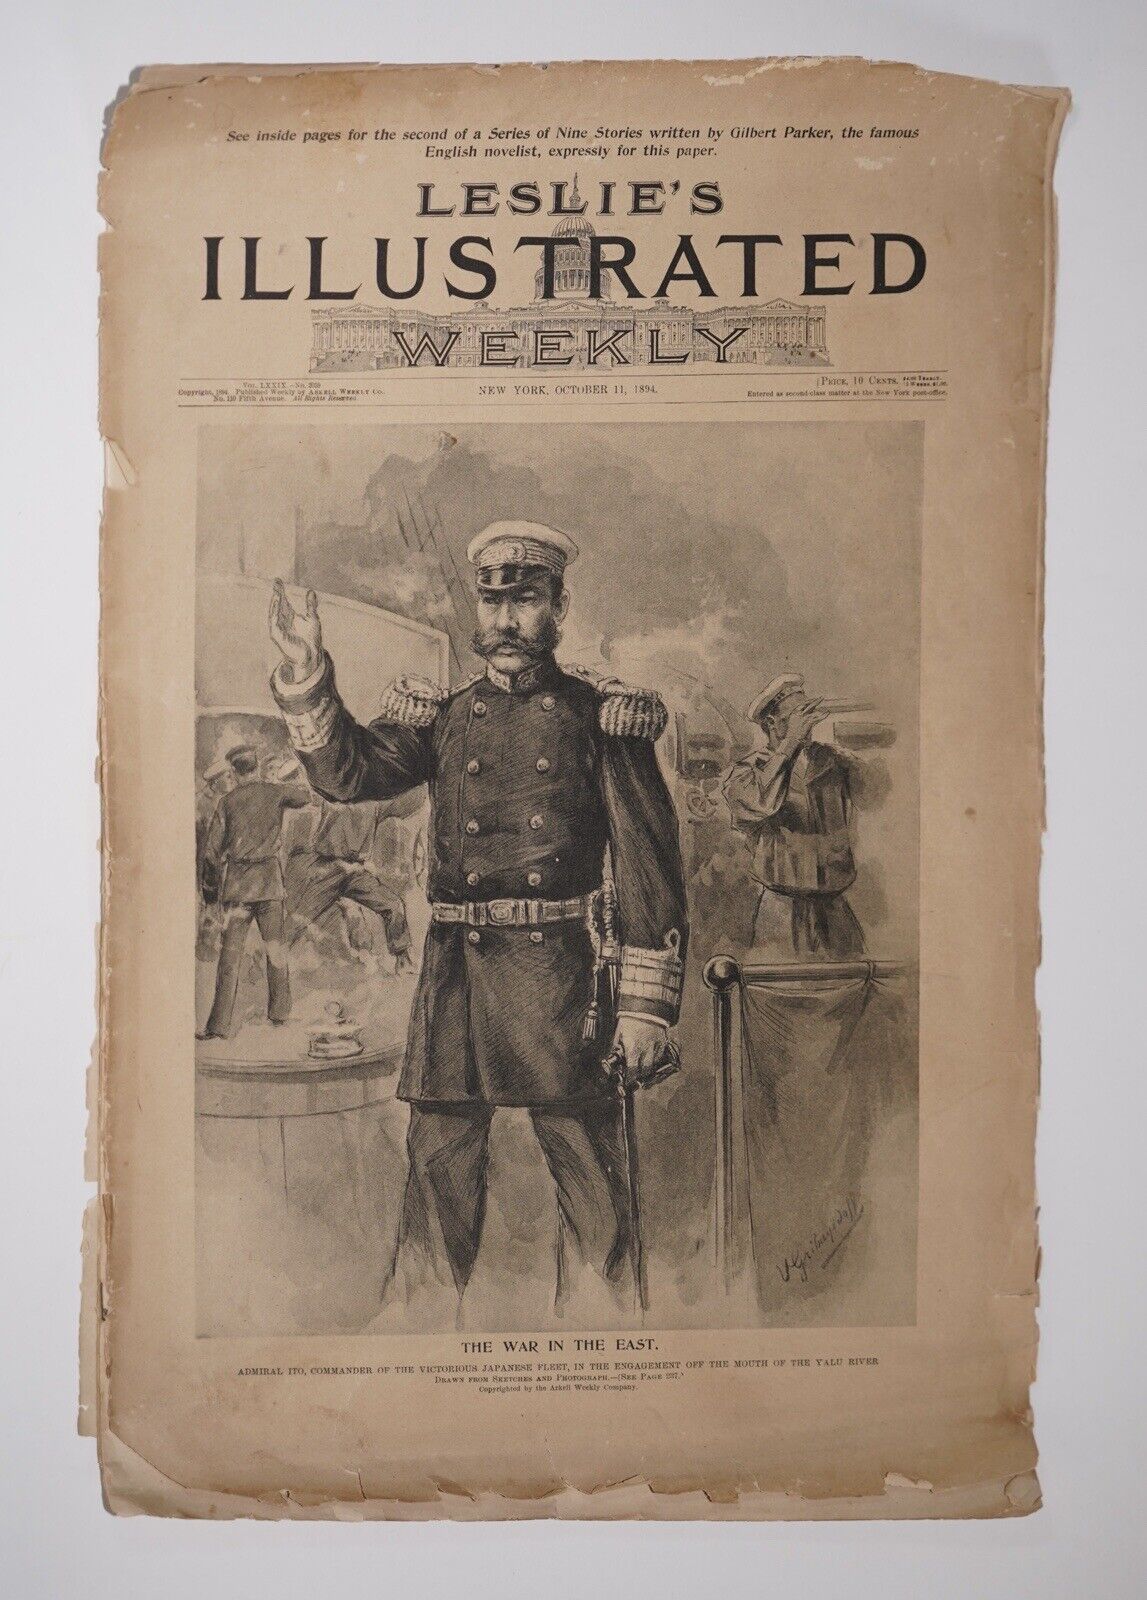 1894 Leslie’s Illustrated Weekly (New York) 16.5”x11.25” Fragile